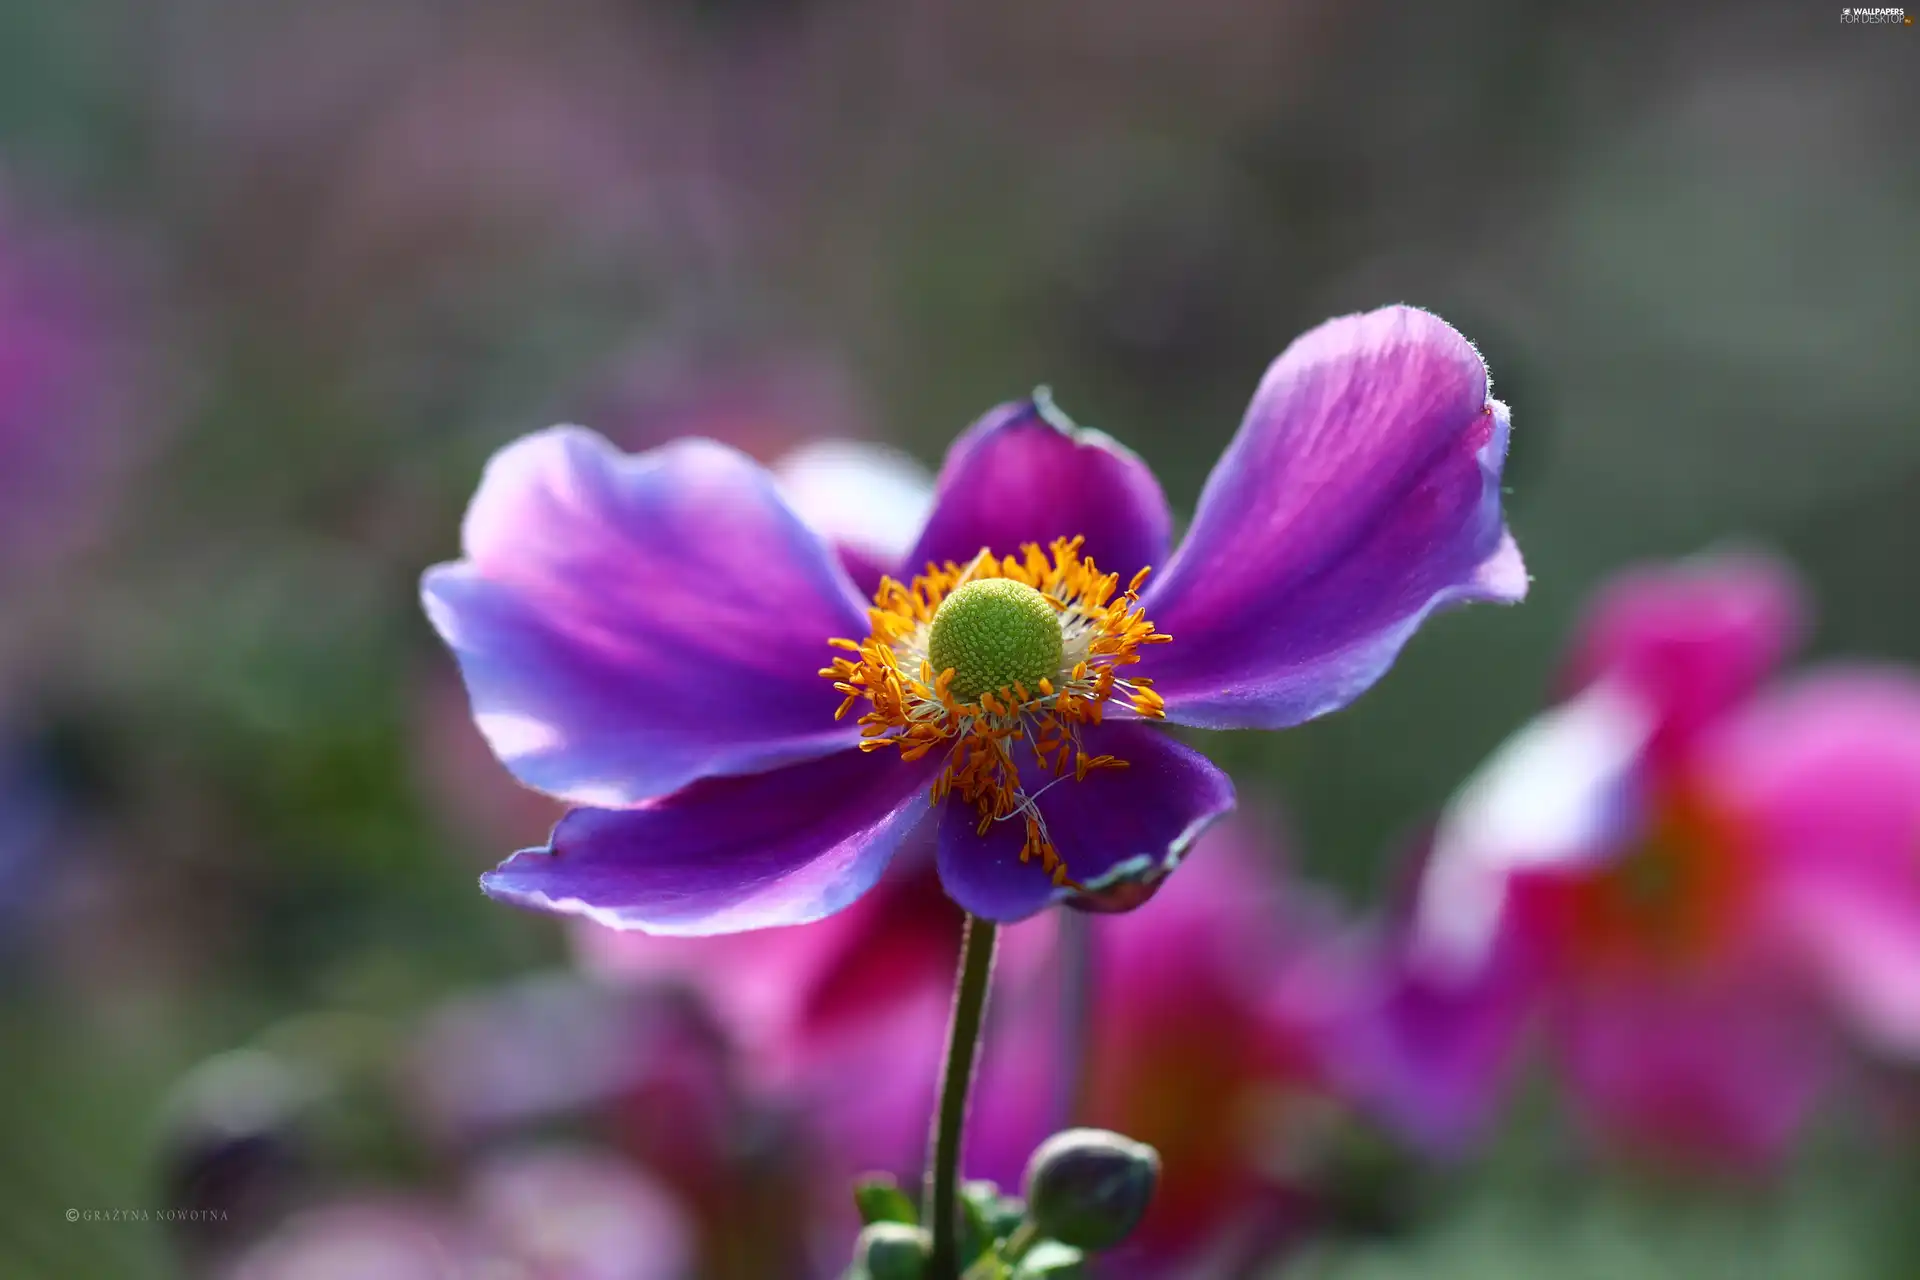 Colourfull Flowers, Japanese anemone, Violet